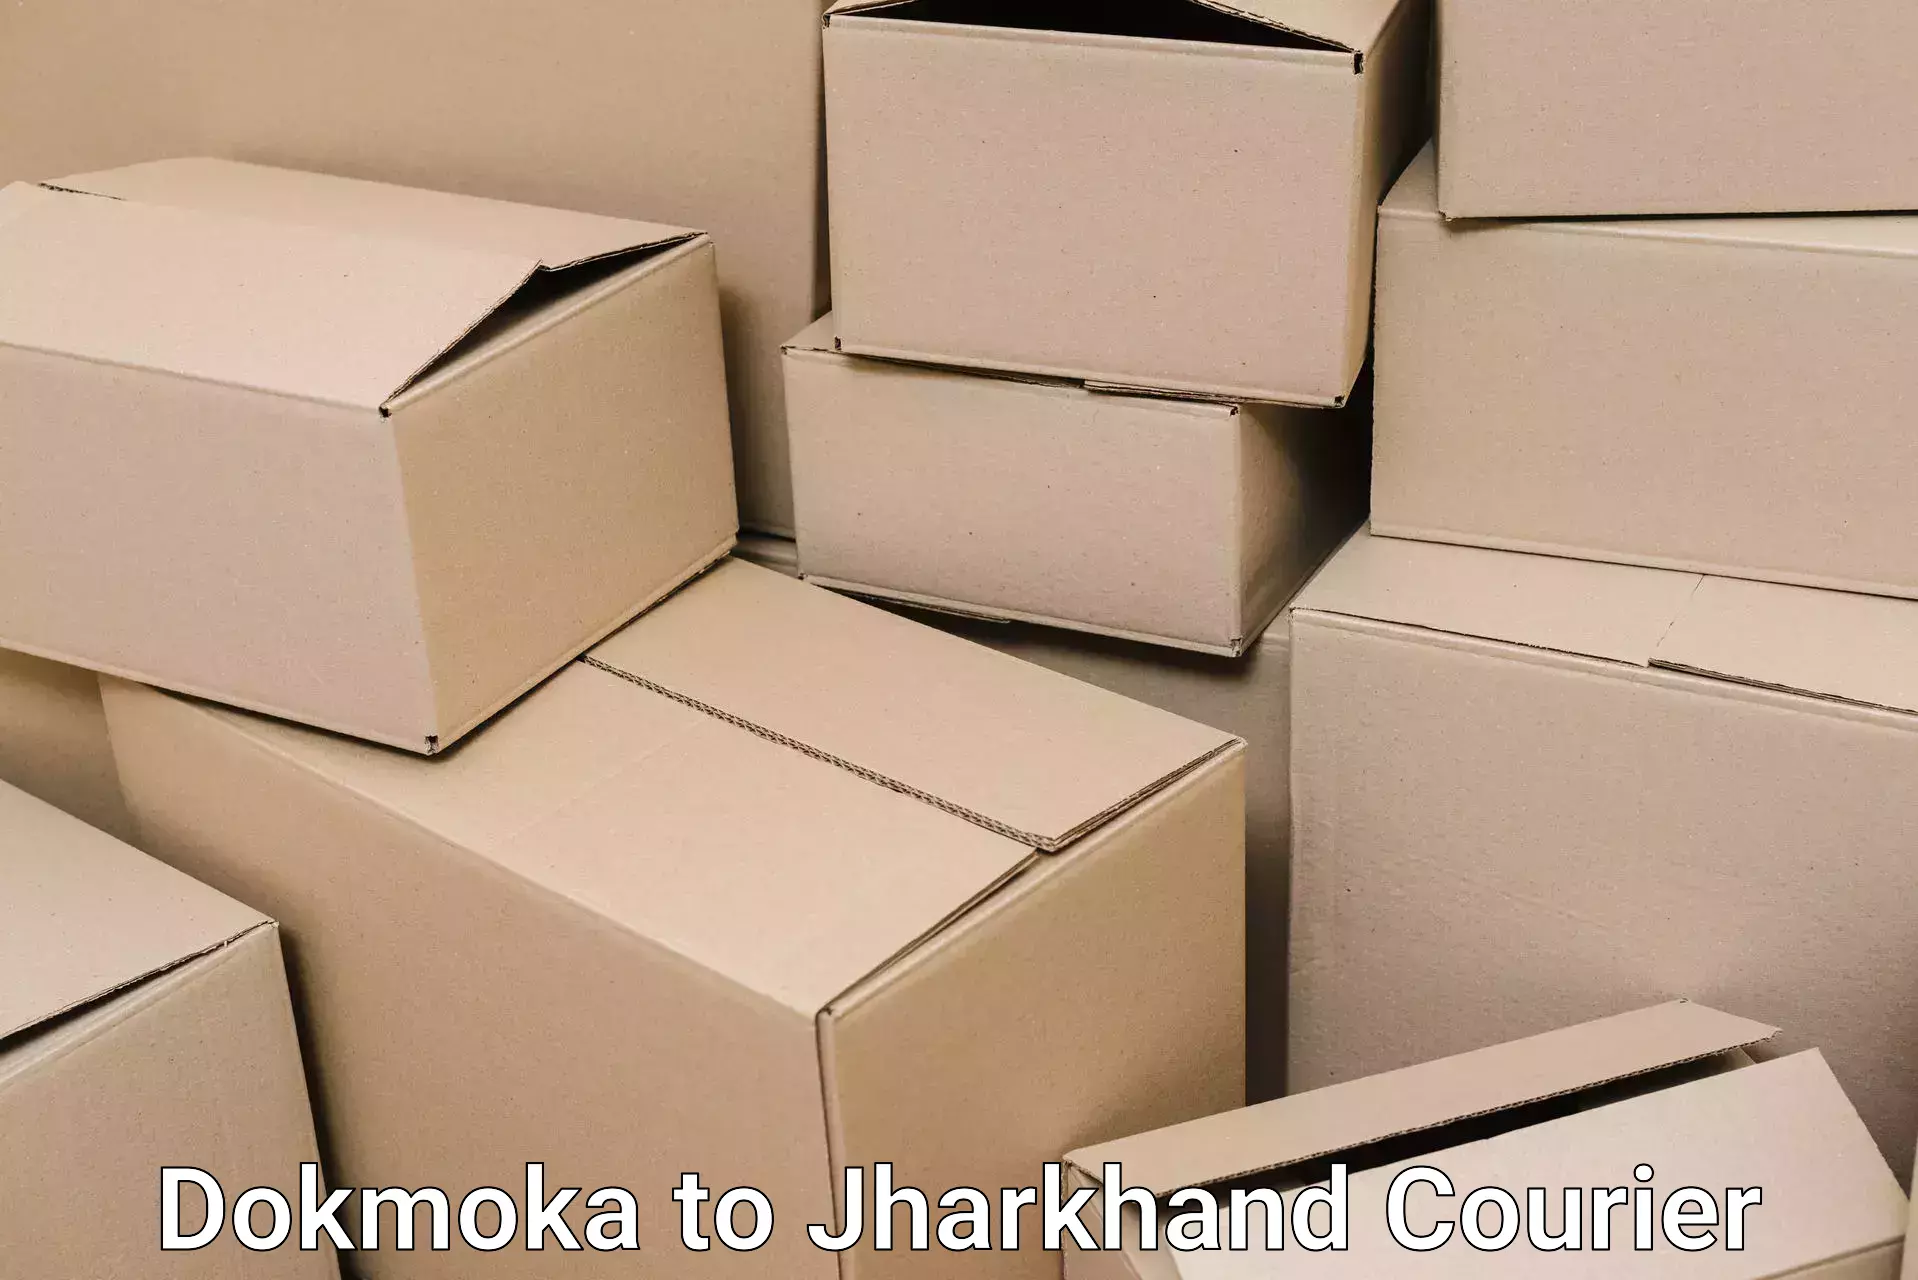 Professional movers in Dokmoka to Jamshedpur